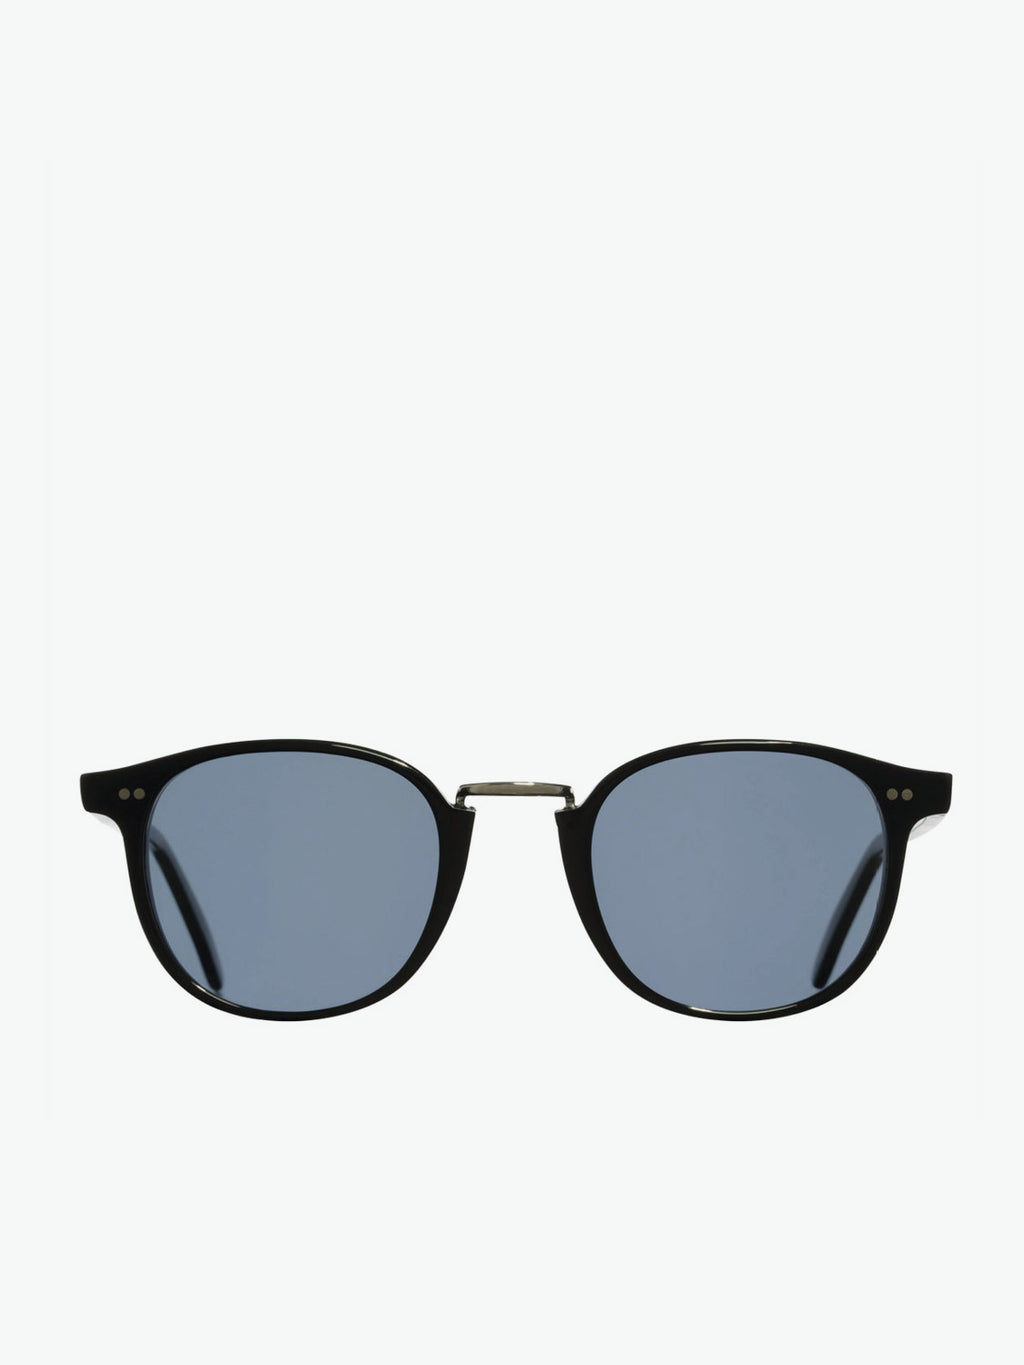 Cutler and Gross 1007 Round-Frame Black Acetate Sunglasses